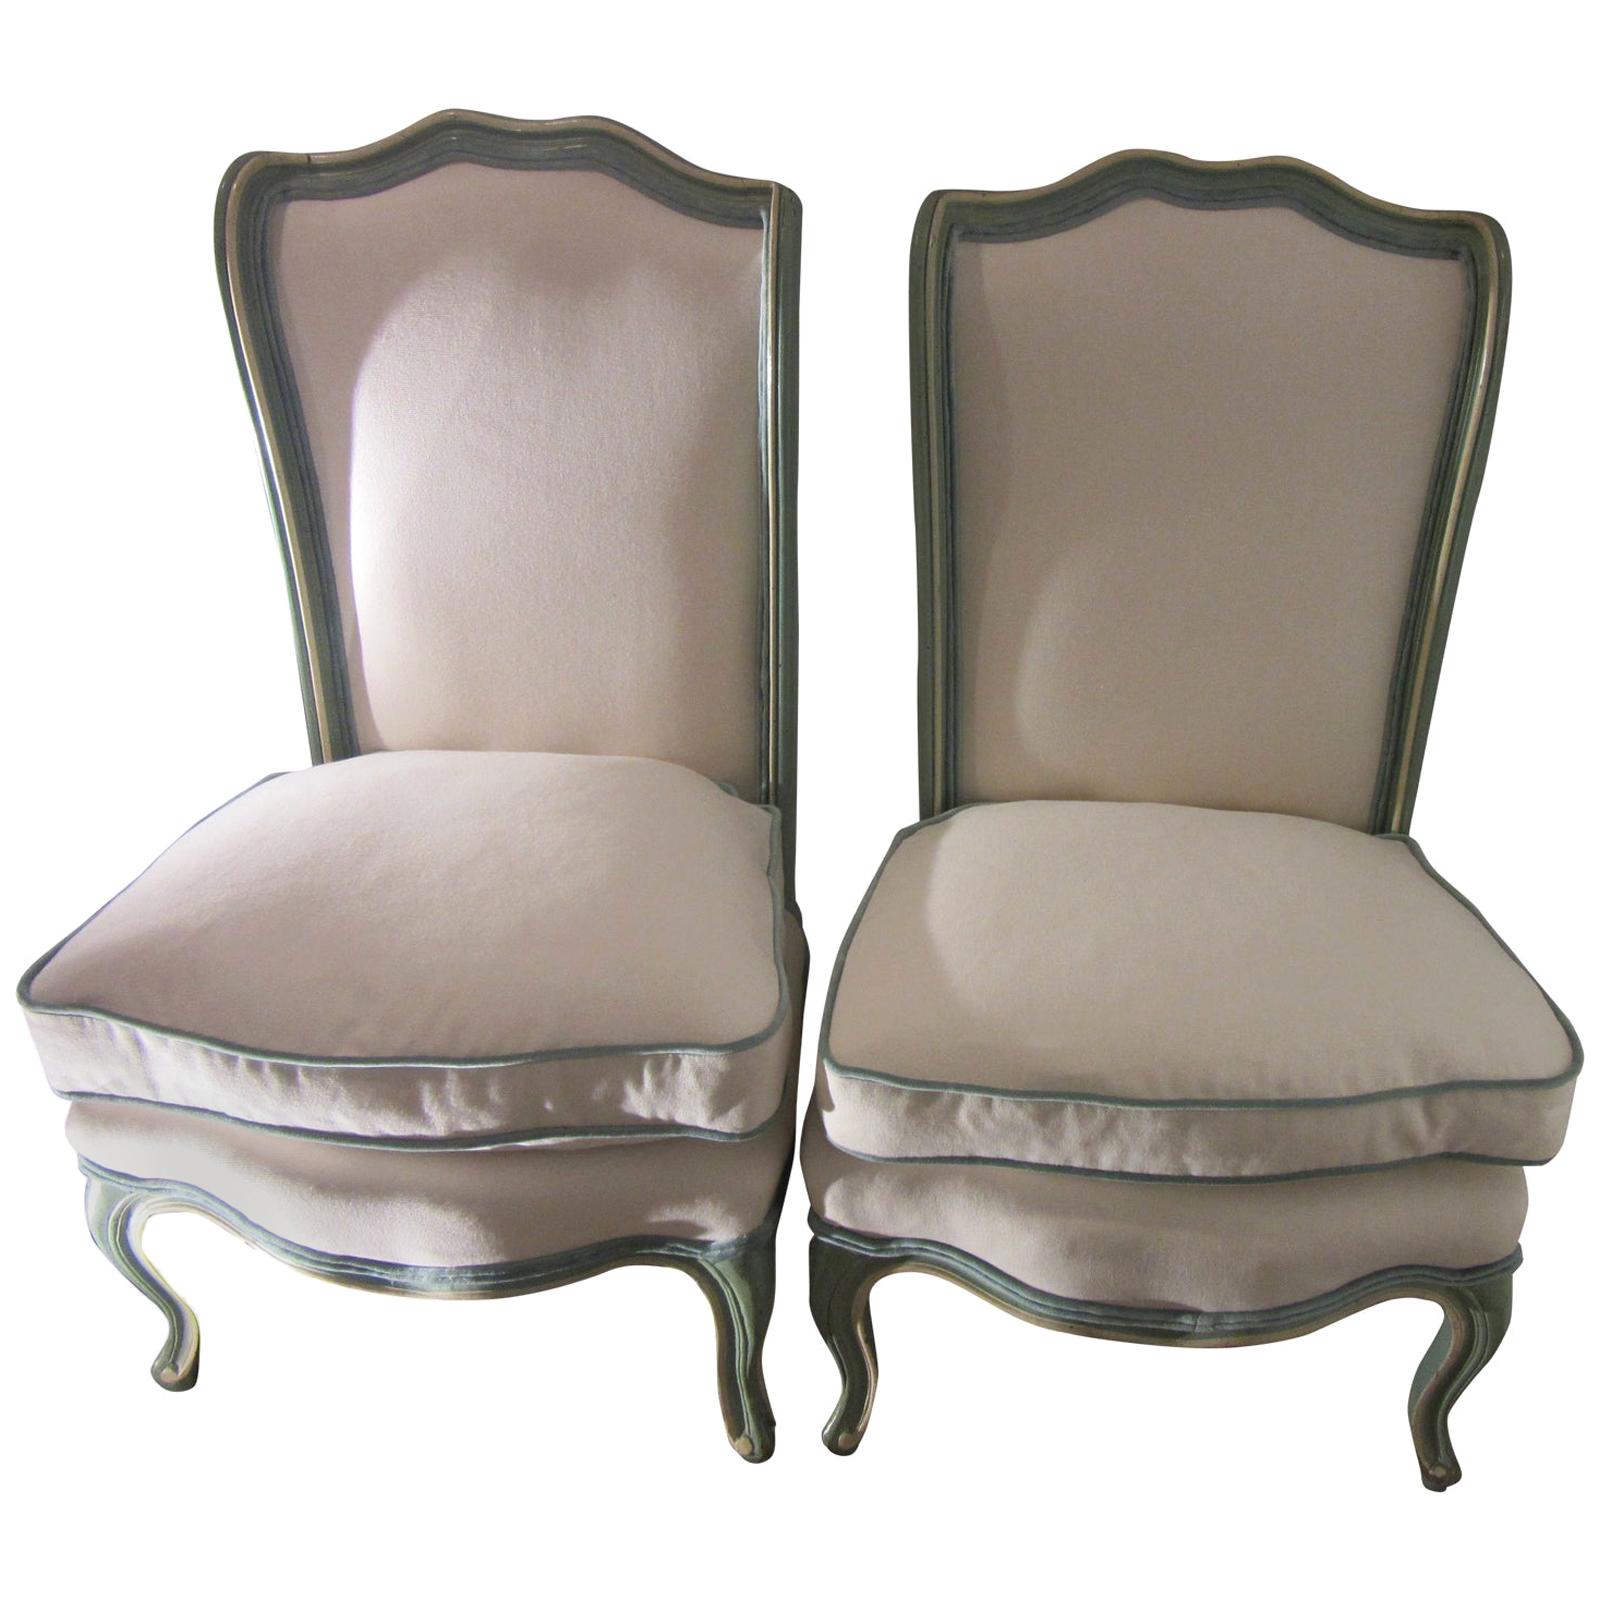 Hollywood Regency Blue Slipper Chairs with White Chenille Upholstery and Leather